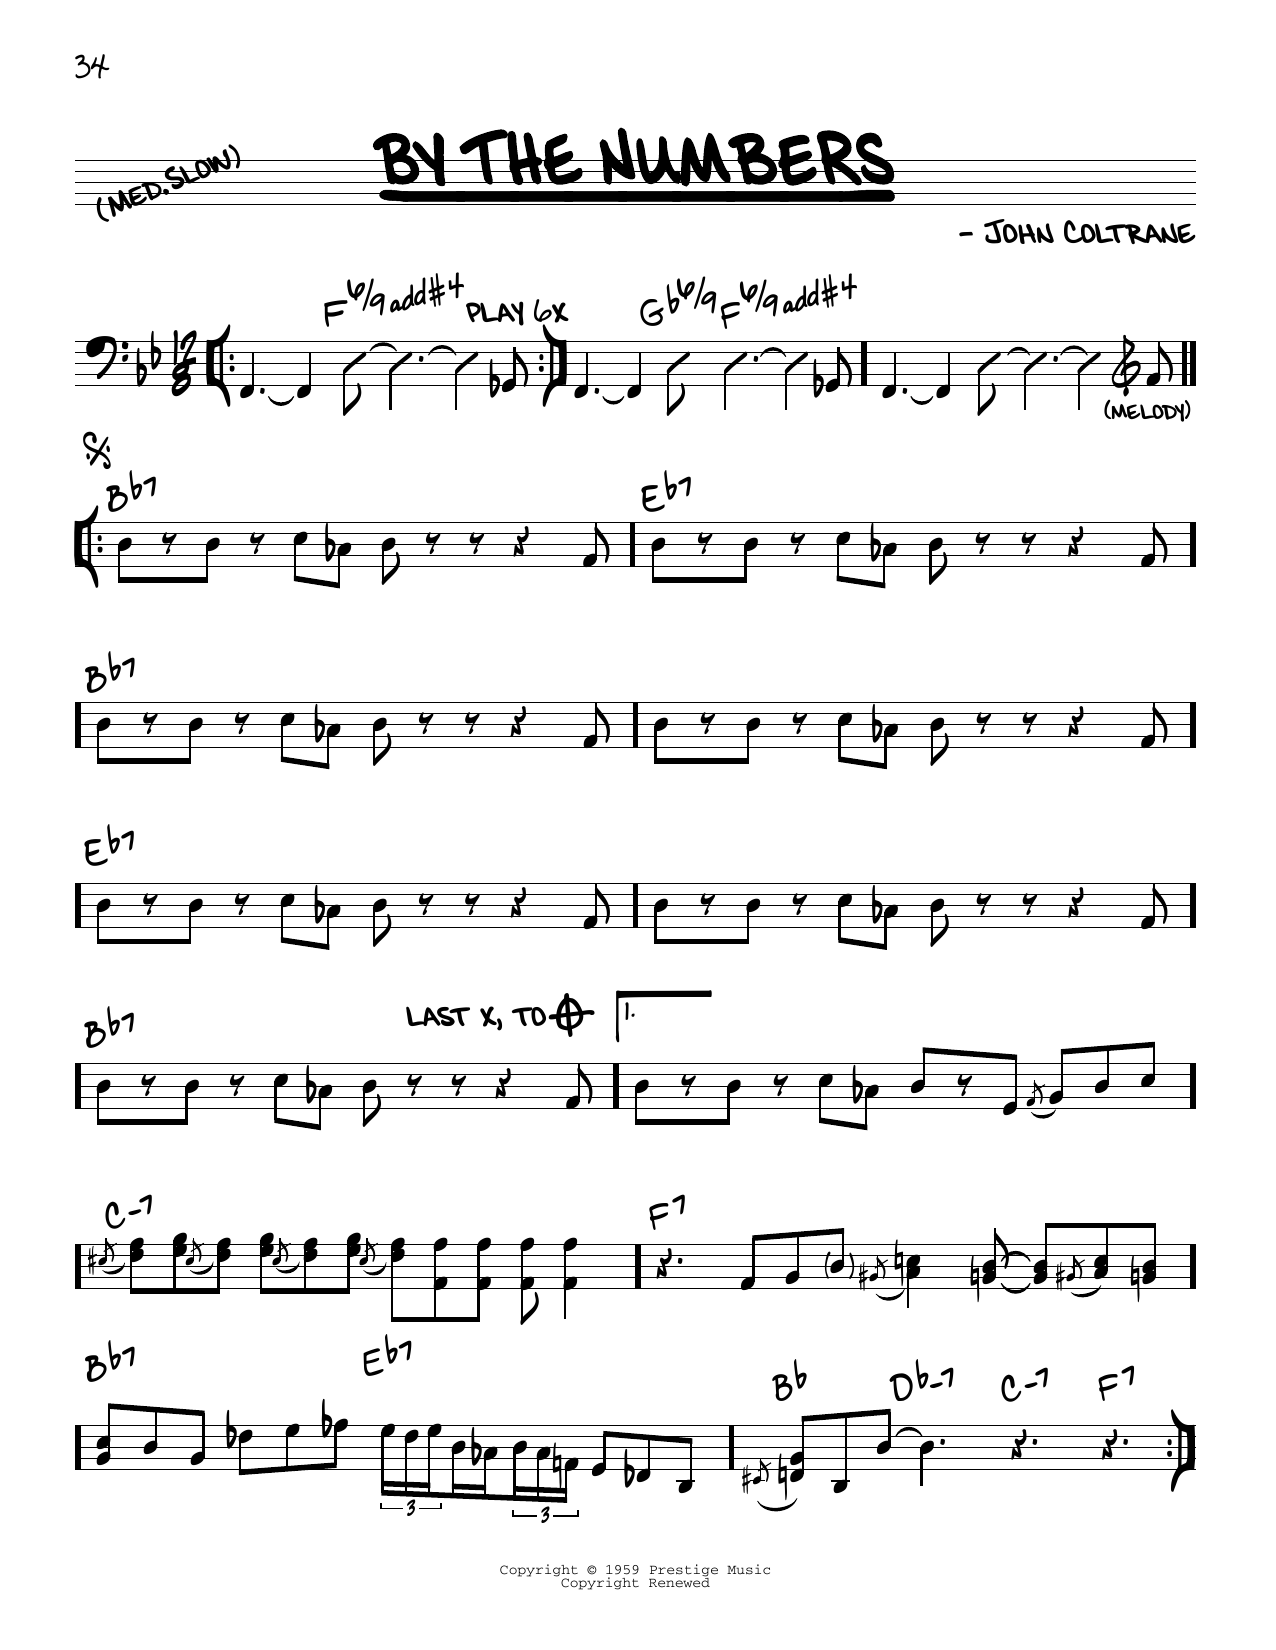 Download John Coltrane By The Numbers Sheet Music